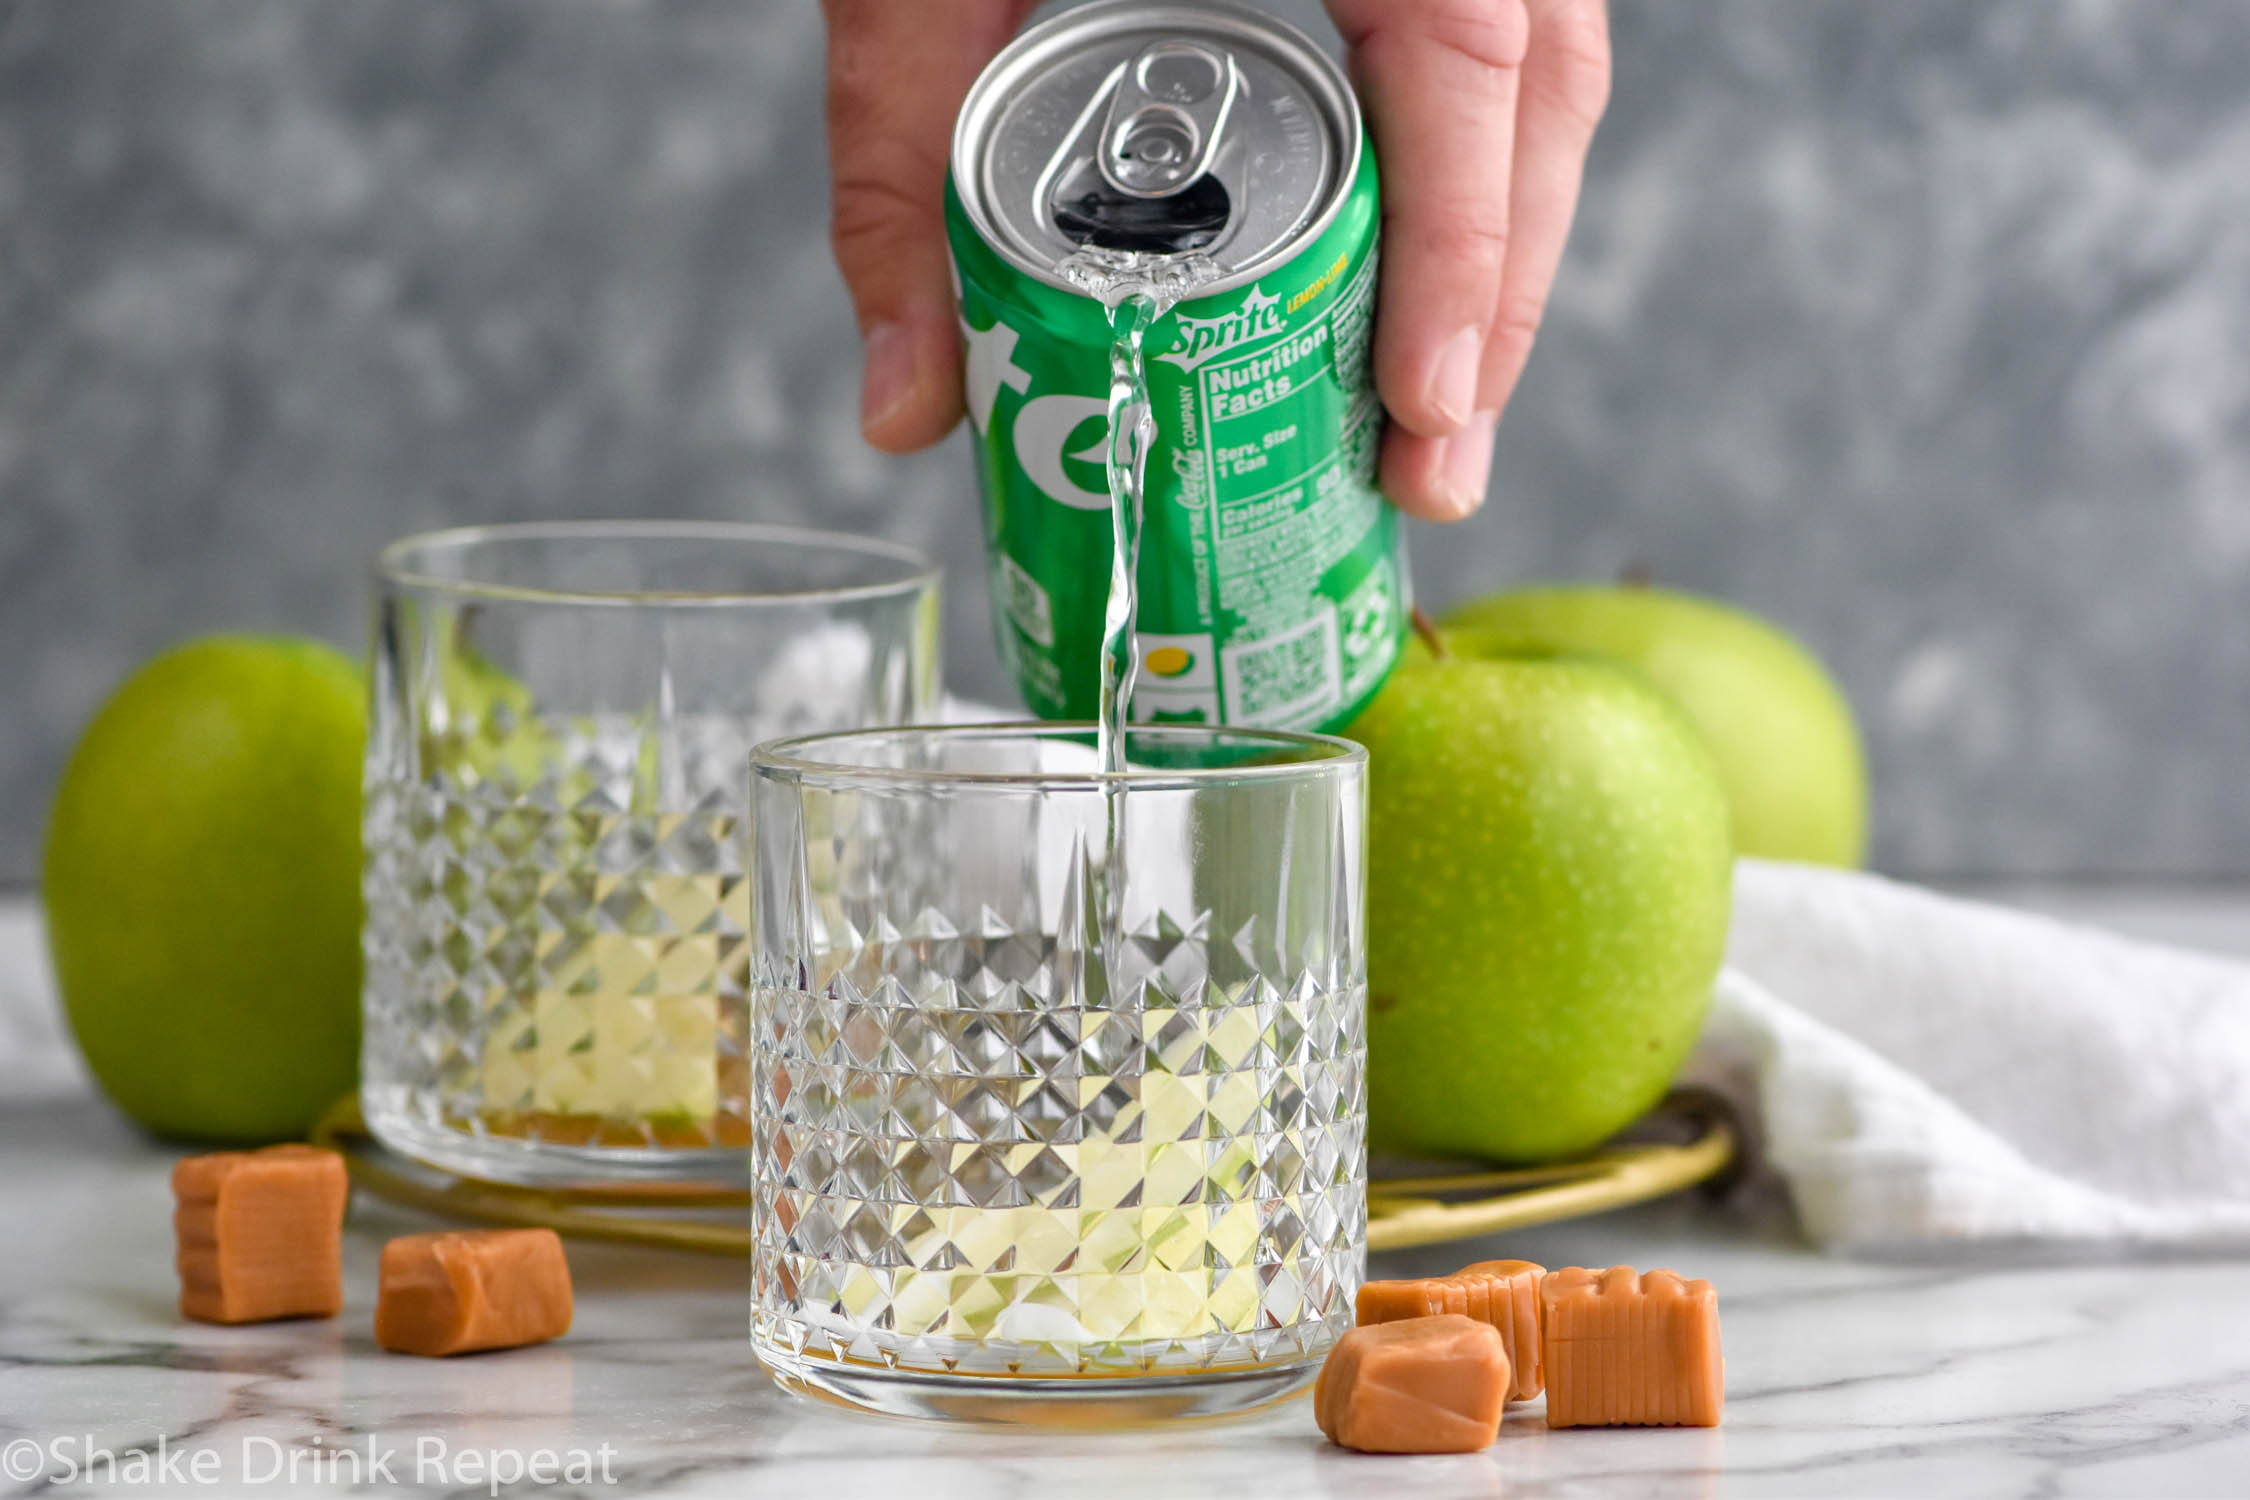 Side view of person's hand pouring lemon lime soda into glass of ingredients for Caramel Apple Old Fashioned recipe. Apples and caramels beside.